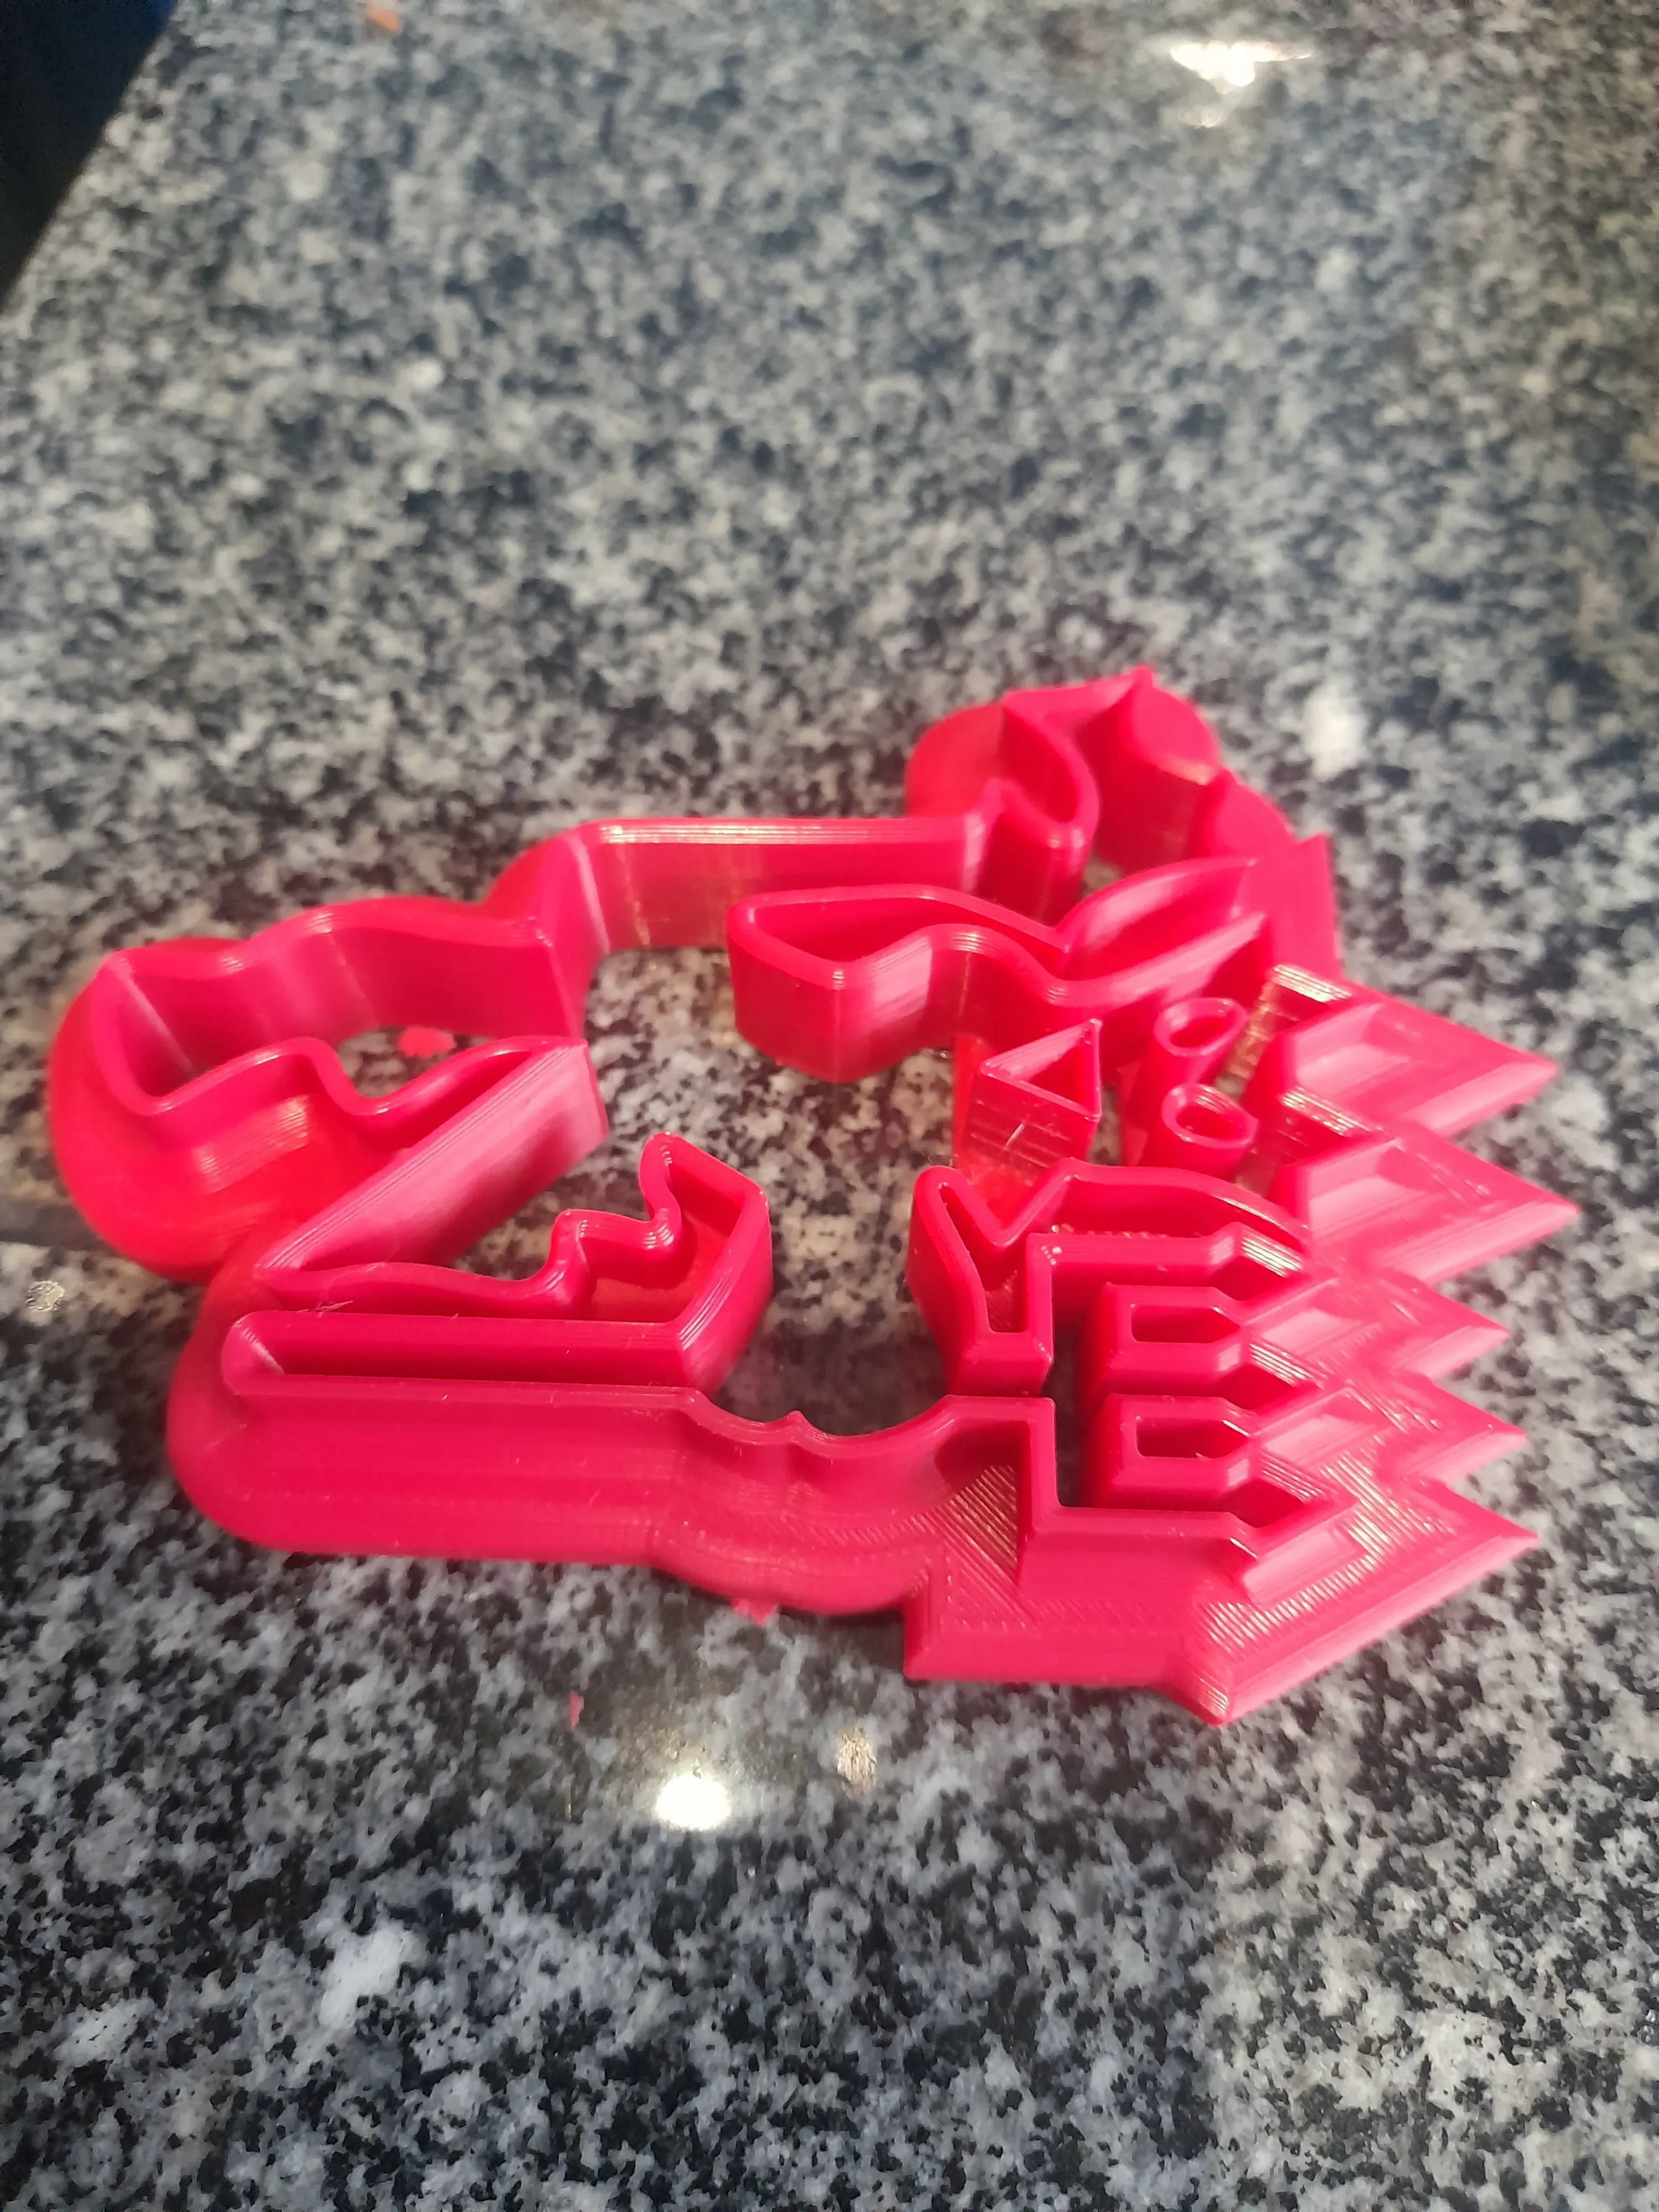 Manchester united red devil logo Cookie Cutter